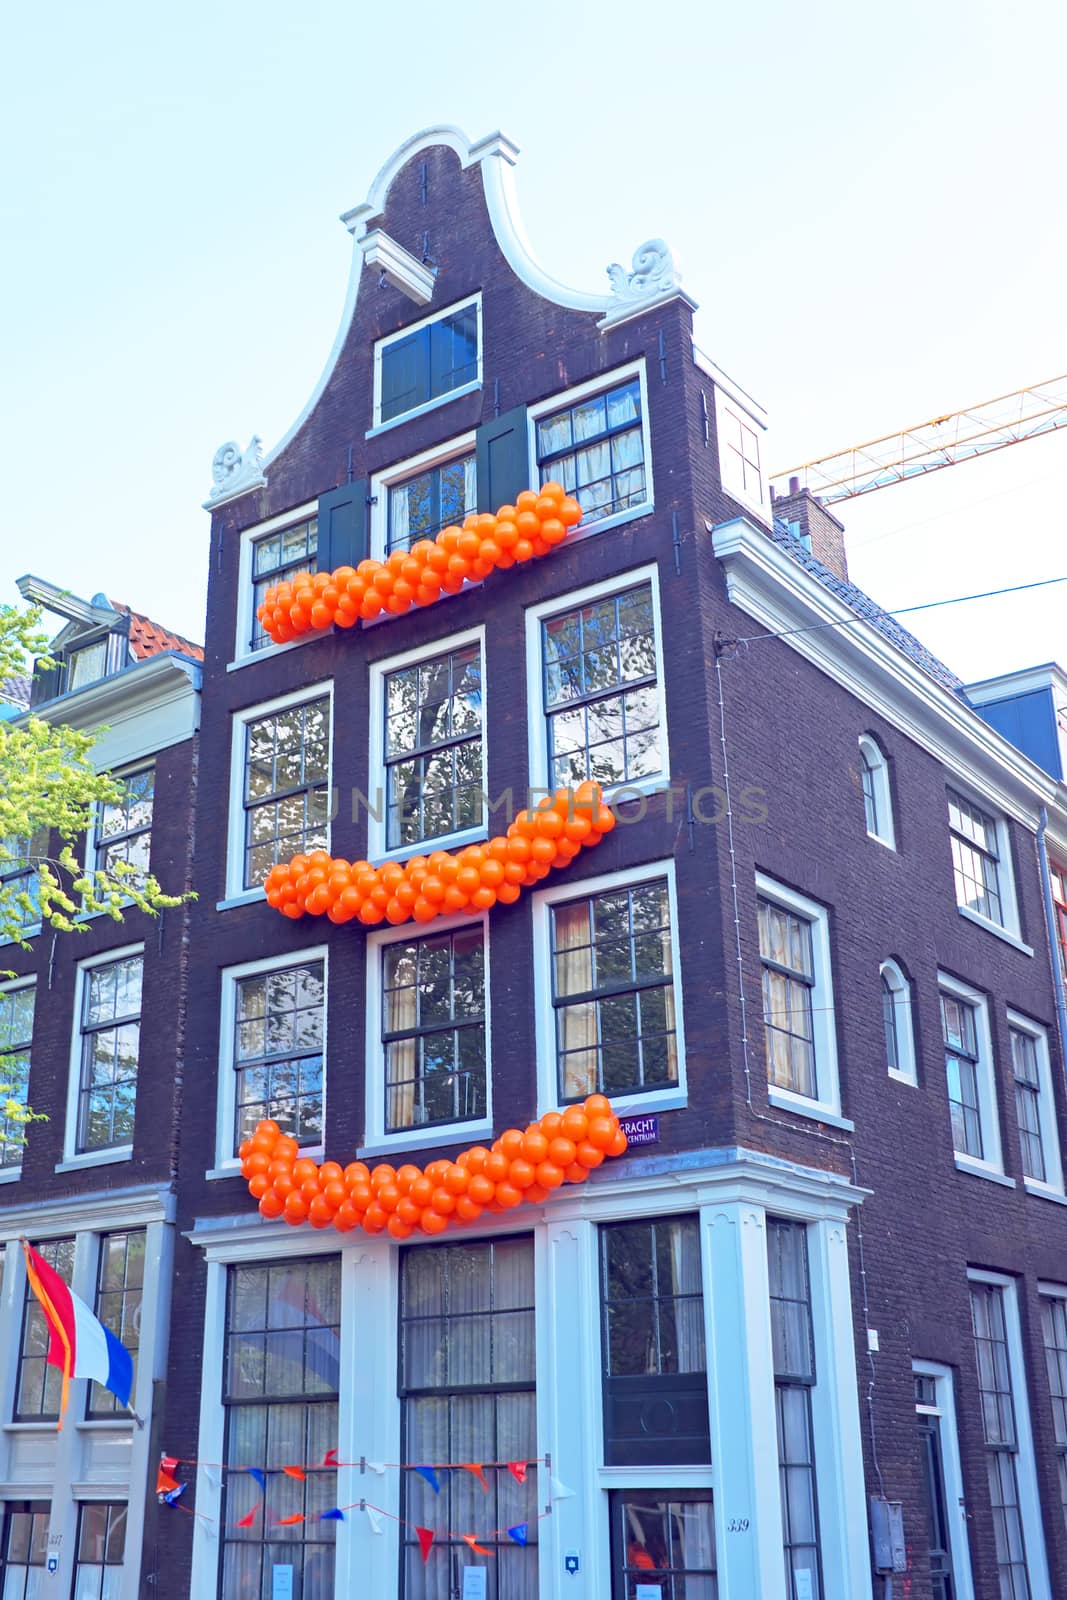 Traditional dutch house decorated with flags and balloons on Kin by devy